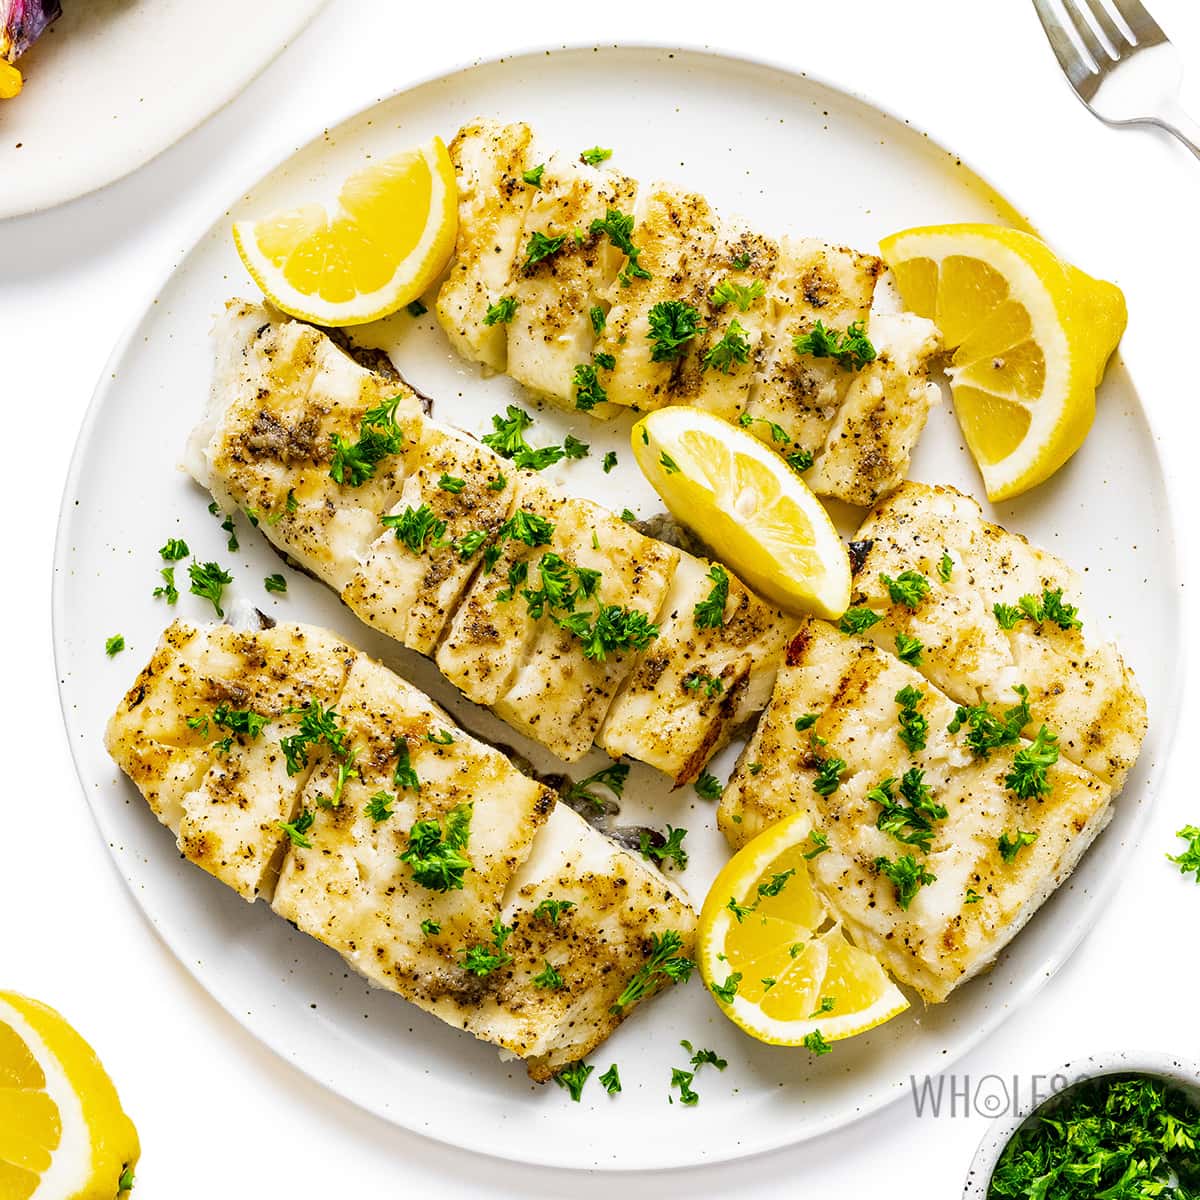 Grilled halibut recipe on a plate with lemon wedges.